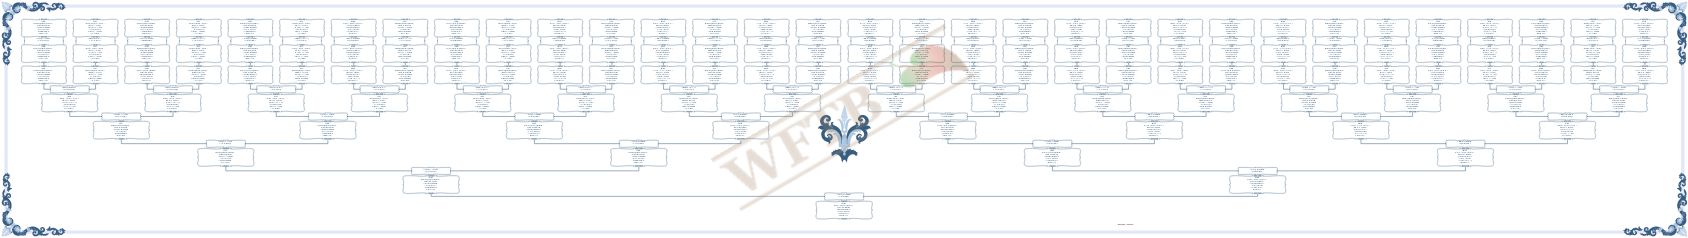 classic-family-tree-7-generations-template-1